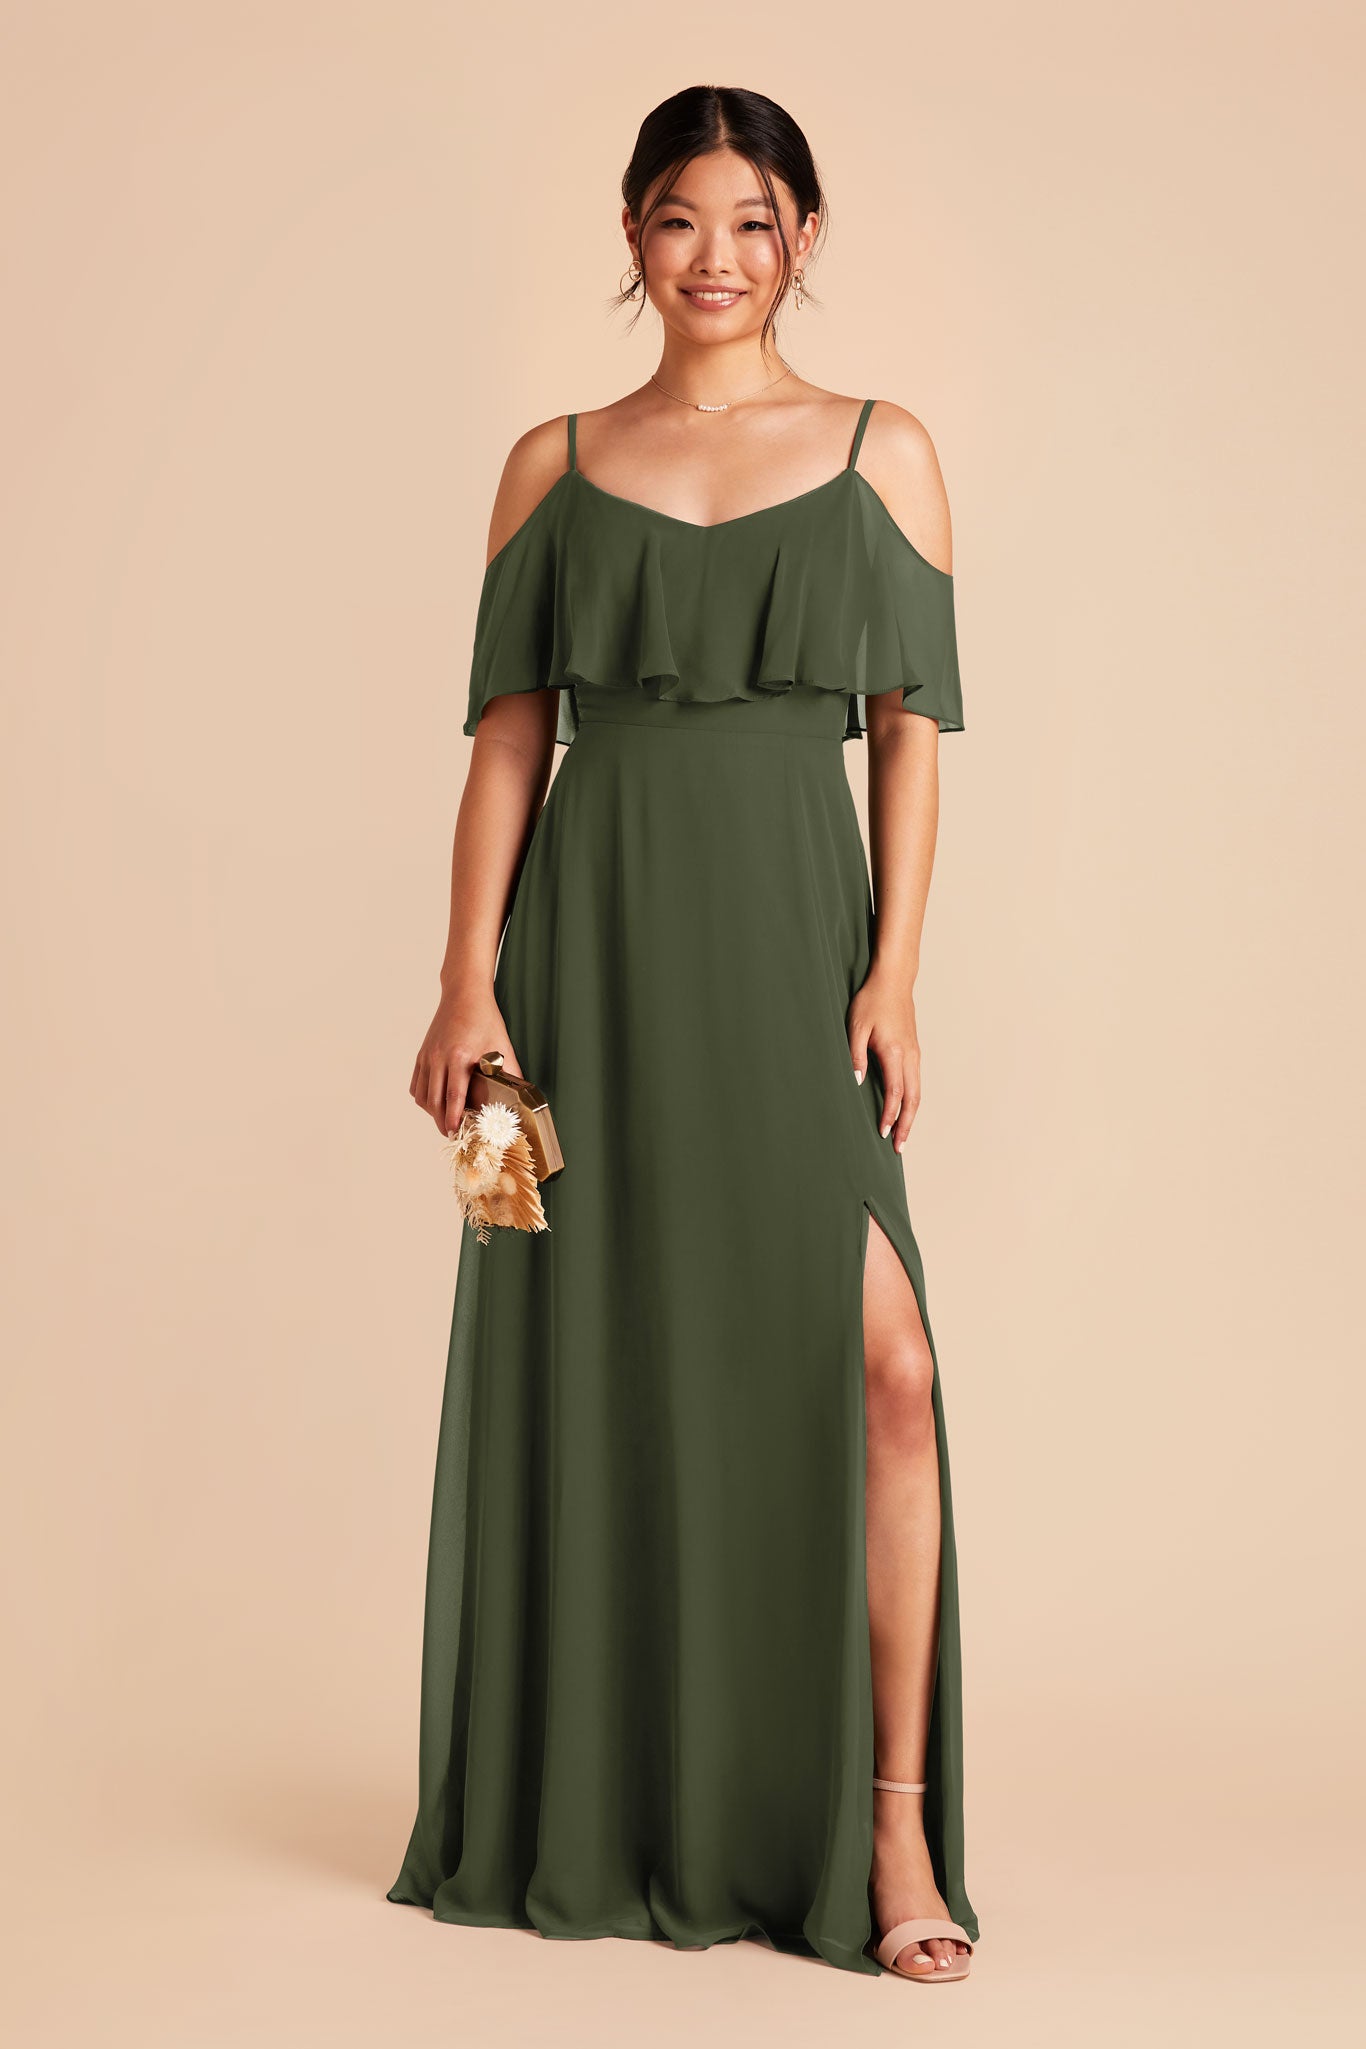 Olive Jane Convertible Dress by Birdy Grey